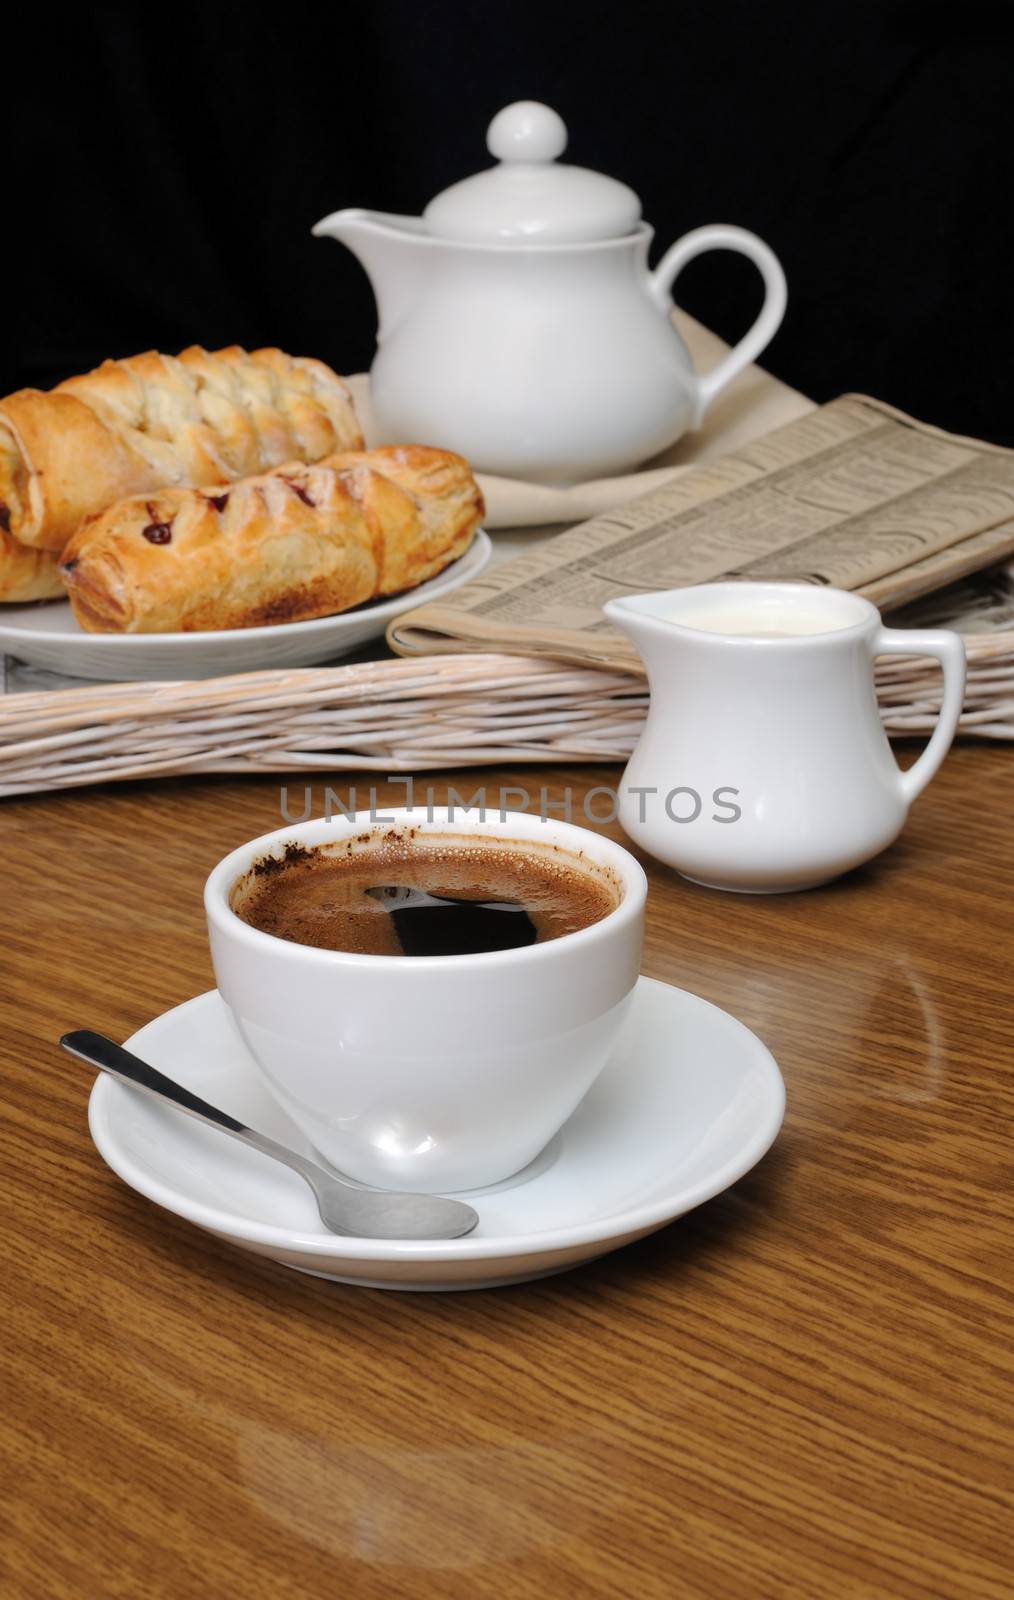 Cup of black coffee on the table with the milkman and biscuits on a tray with newspaper

